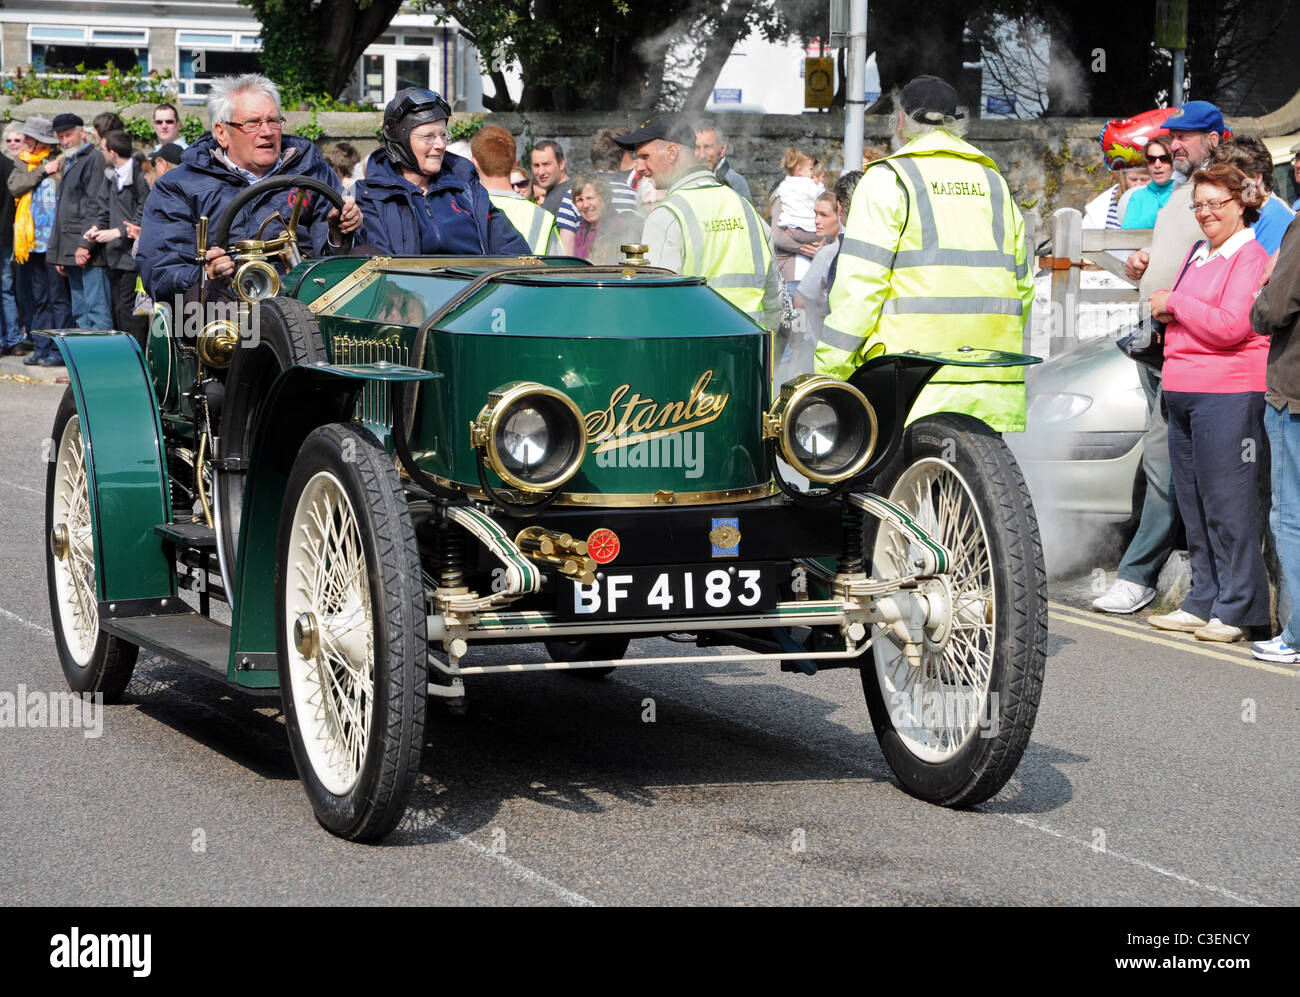 A Vintage ' Stanley ' Steam car in the Annual Trevithick Day steam parade at Camborne in Cornwall UK Stock Photo